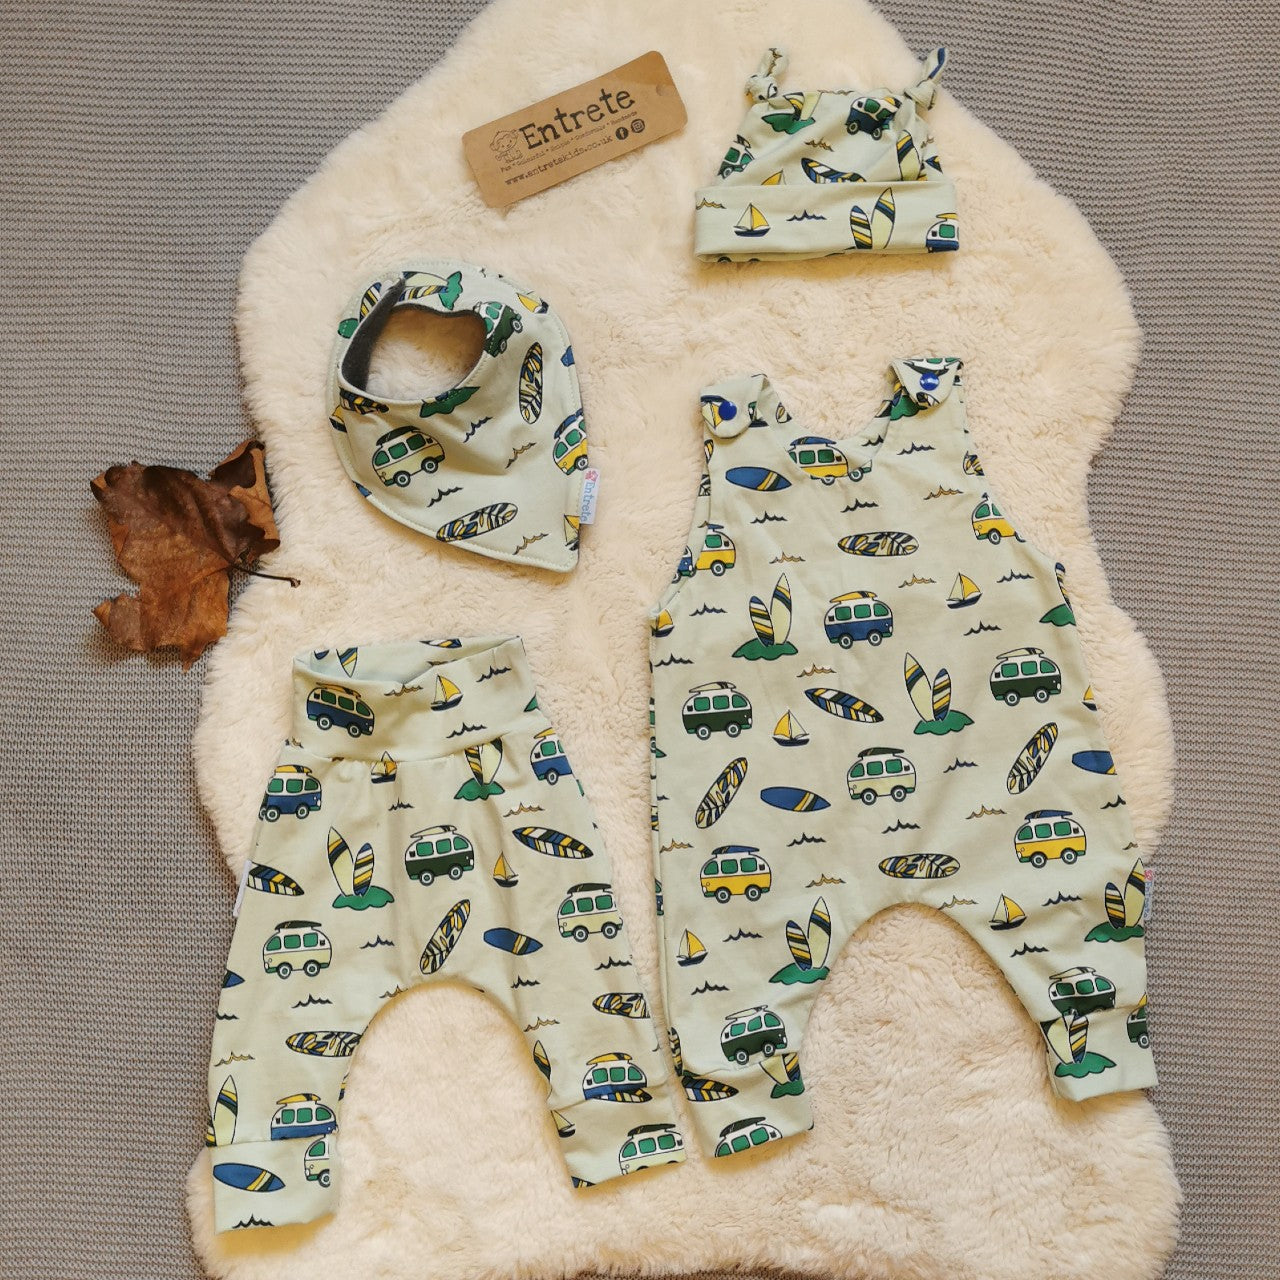 A large baby gift set shown in mint surf campervans for demonstration purposes, your gift set will be handmade using navy chicks cotton jersey.